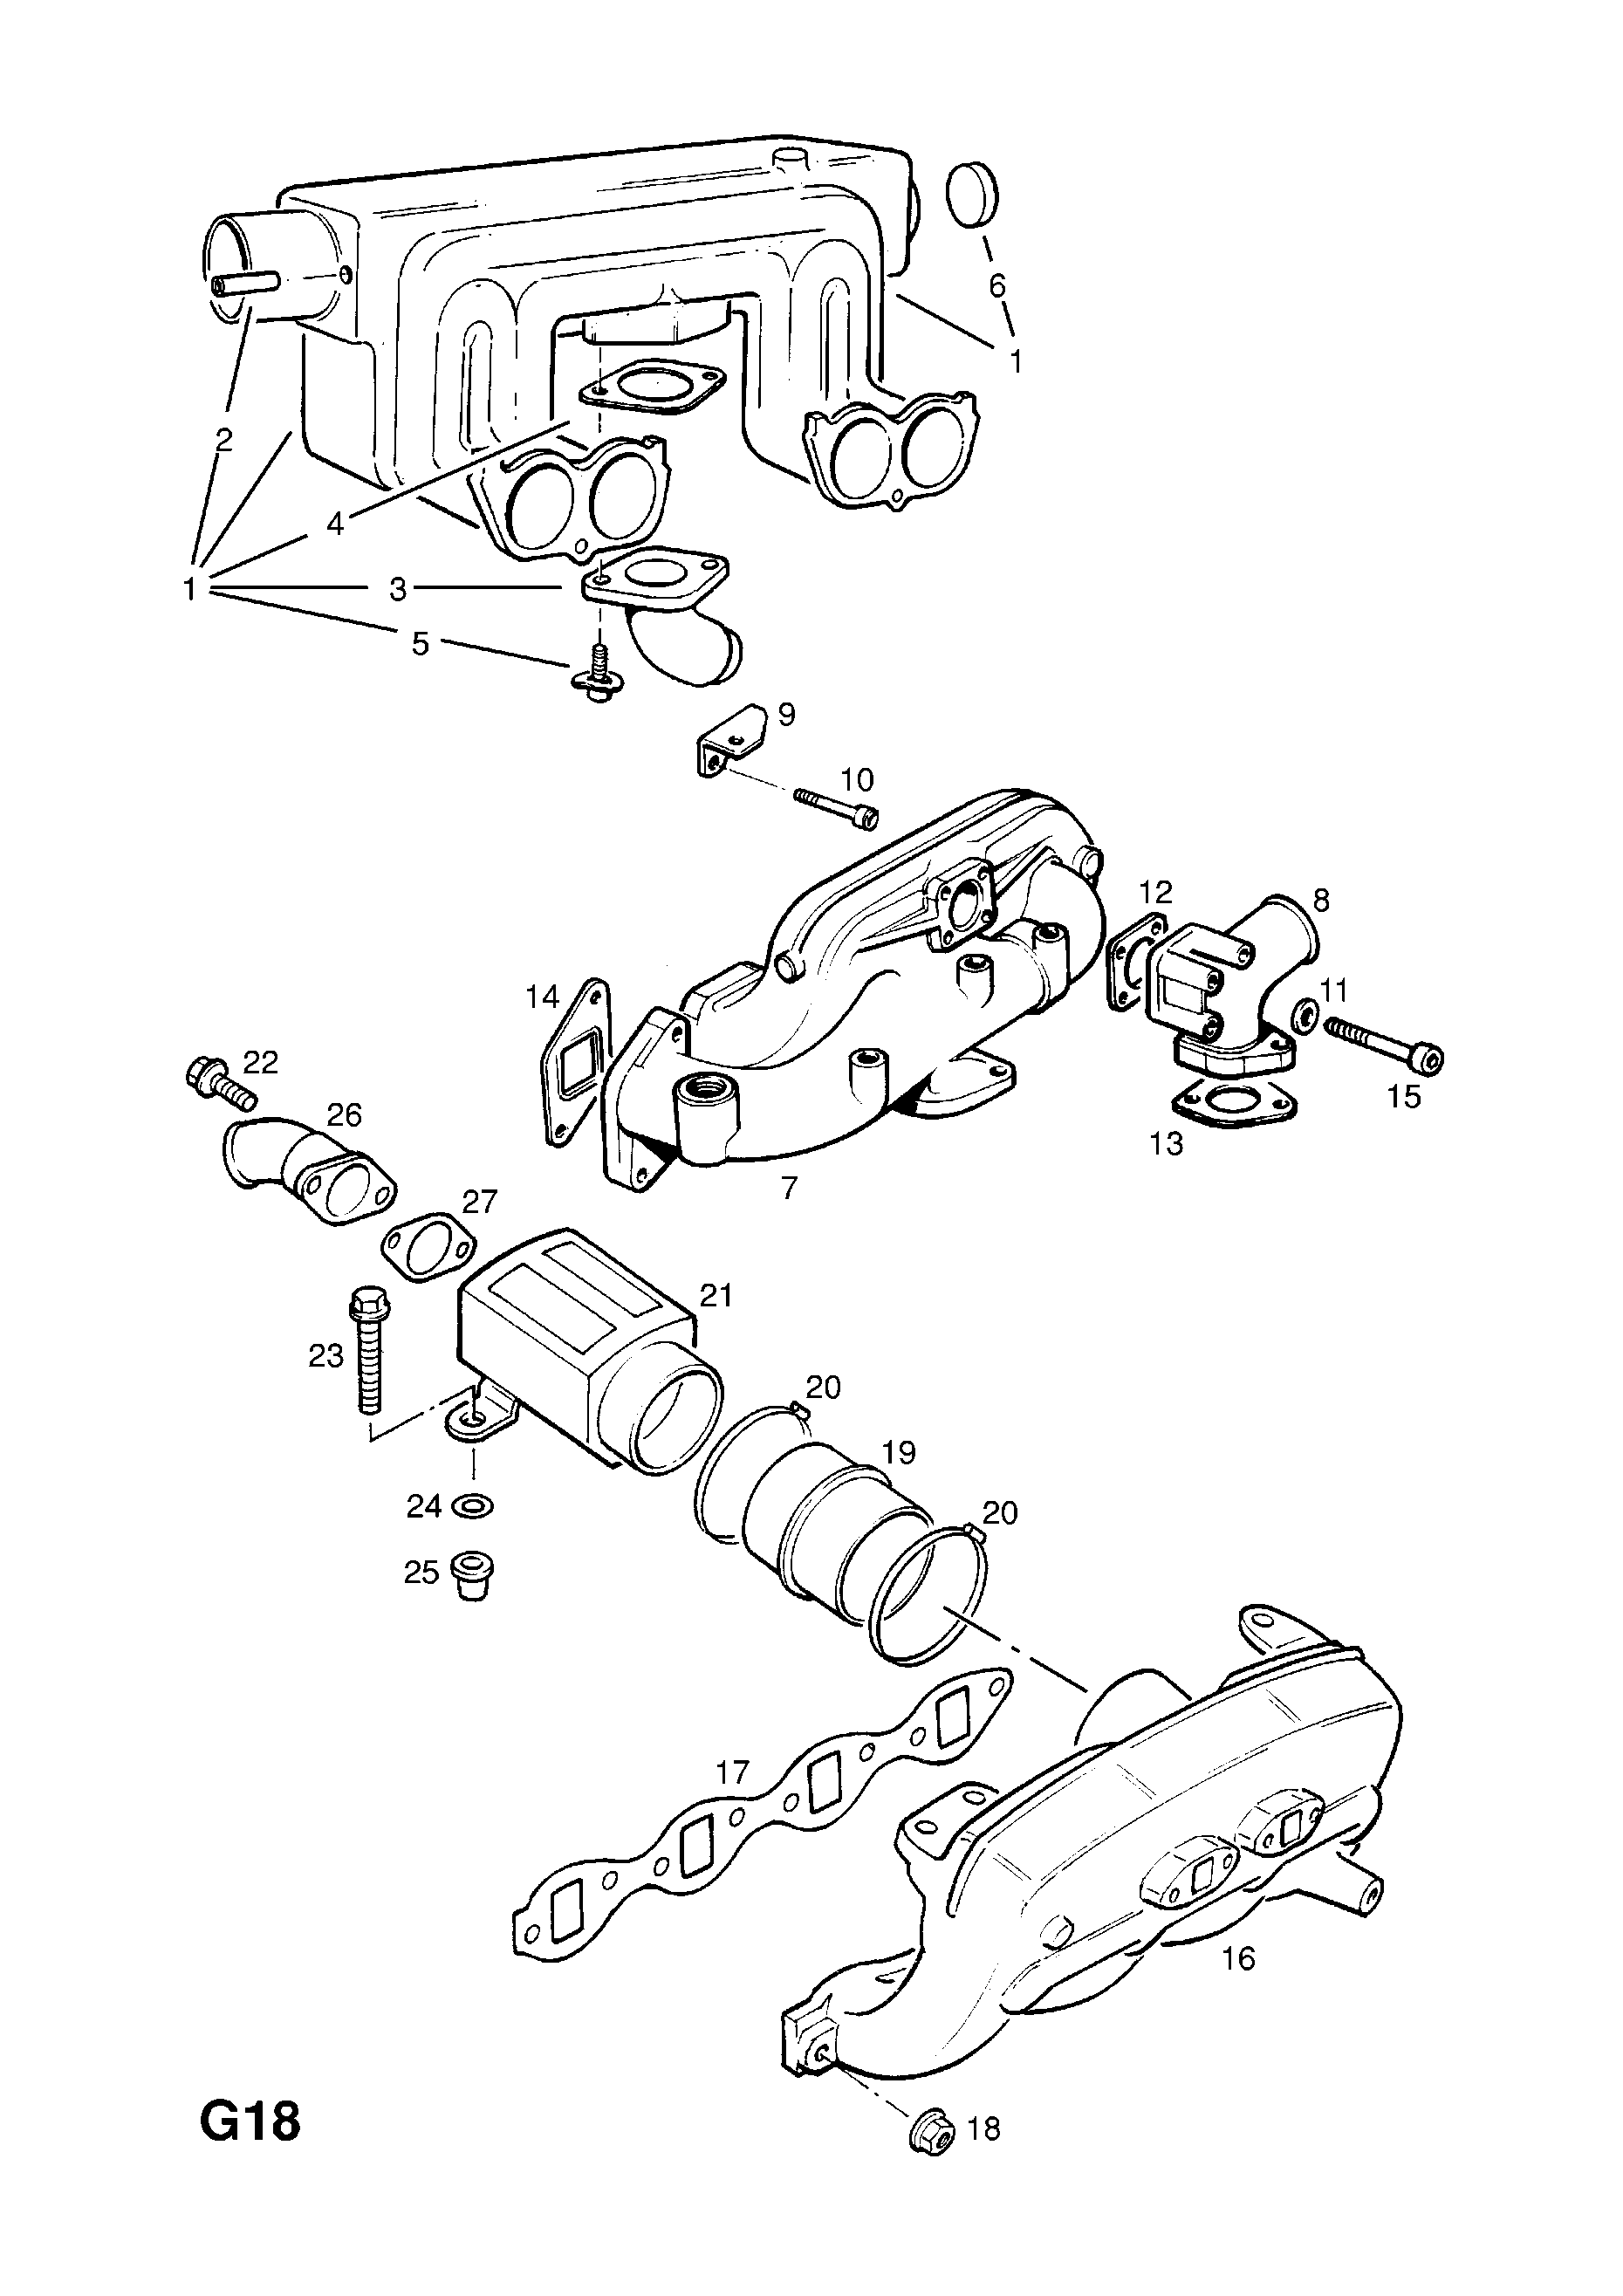 INDUCTION MANIFOLD (CONTD.) <small><i>[28TD DIESEL ENGINE]</i></small>